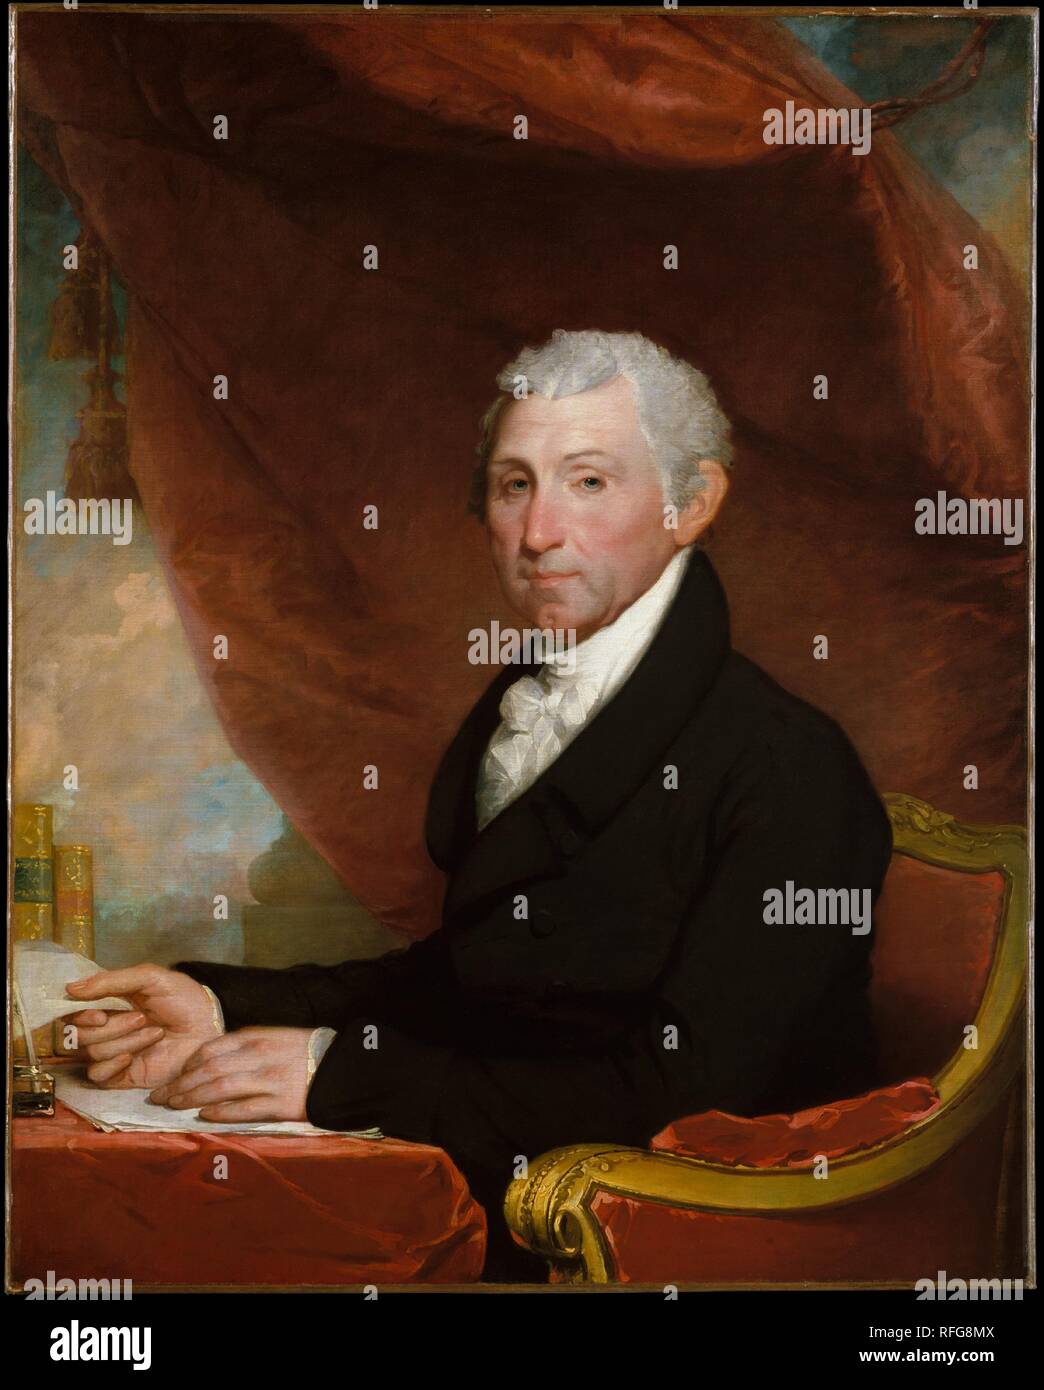 James Monroe. Artist: Gilbert Stuart (American, North Kingston, Rhode Island 1755-1828 Boston, Massachusetts). Dimensions: 40 1/4 x 32 in. (102.2 x 81.3 cm). Date: ca. 1820-22.  The fifth president of the United States, James Monroe, was a Virginian who enjoyed the advantages of being the disciple and political protégé of Thomas Jefferson. Before becoming president, he had held many diplomatic posts, including service as ambassador to France and to England. The year after this picture was completed, he issued the famous Monroe Doctrine, a statement against any intervention from foreign governm Stock Photo